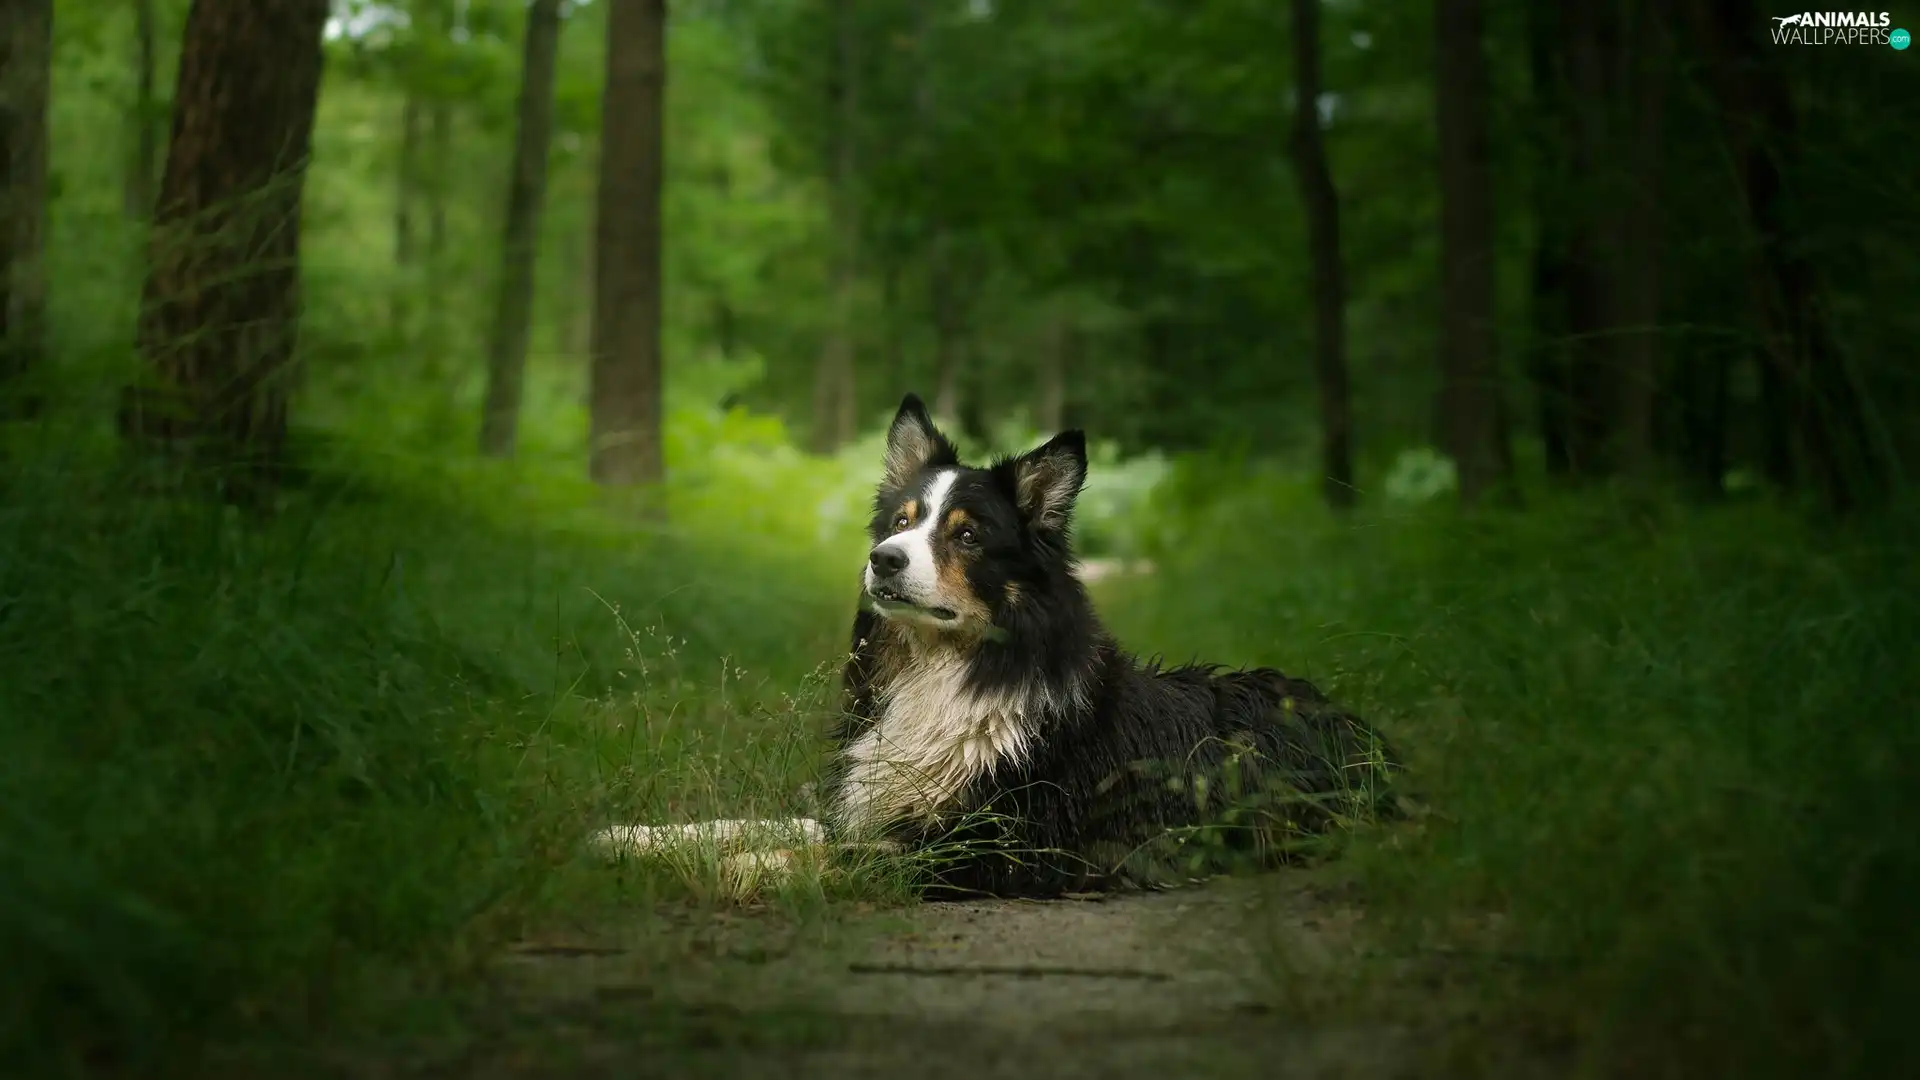 viewes, grass, Border Collie, trees, dog